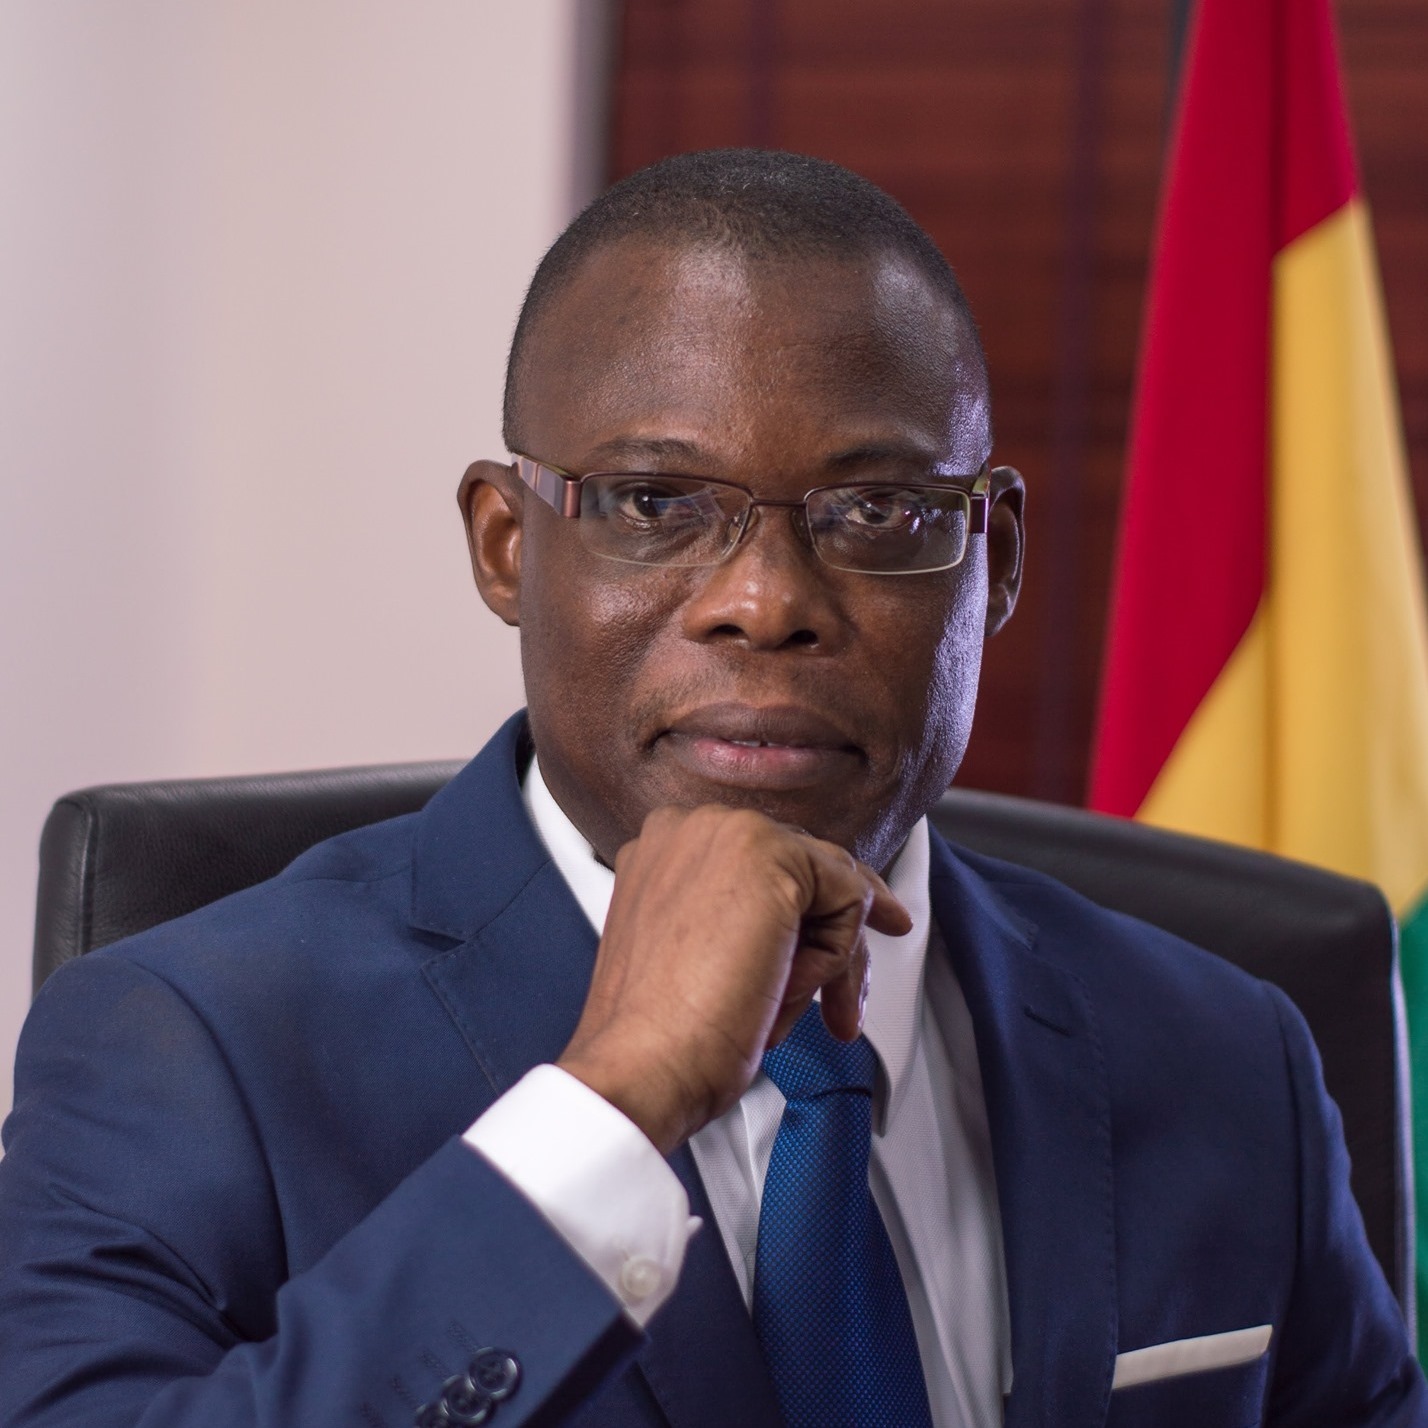 NDC General Secretary Fifi Kwetey says the NPP government is full of toxic, incompetent and corrupt individuals